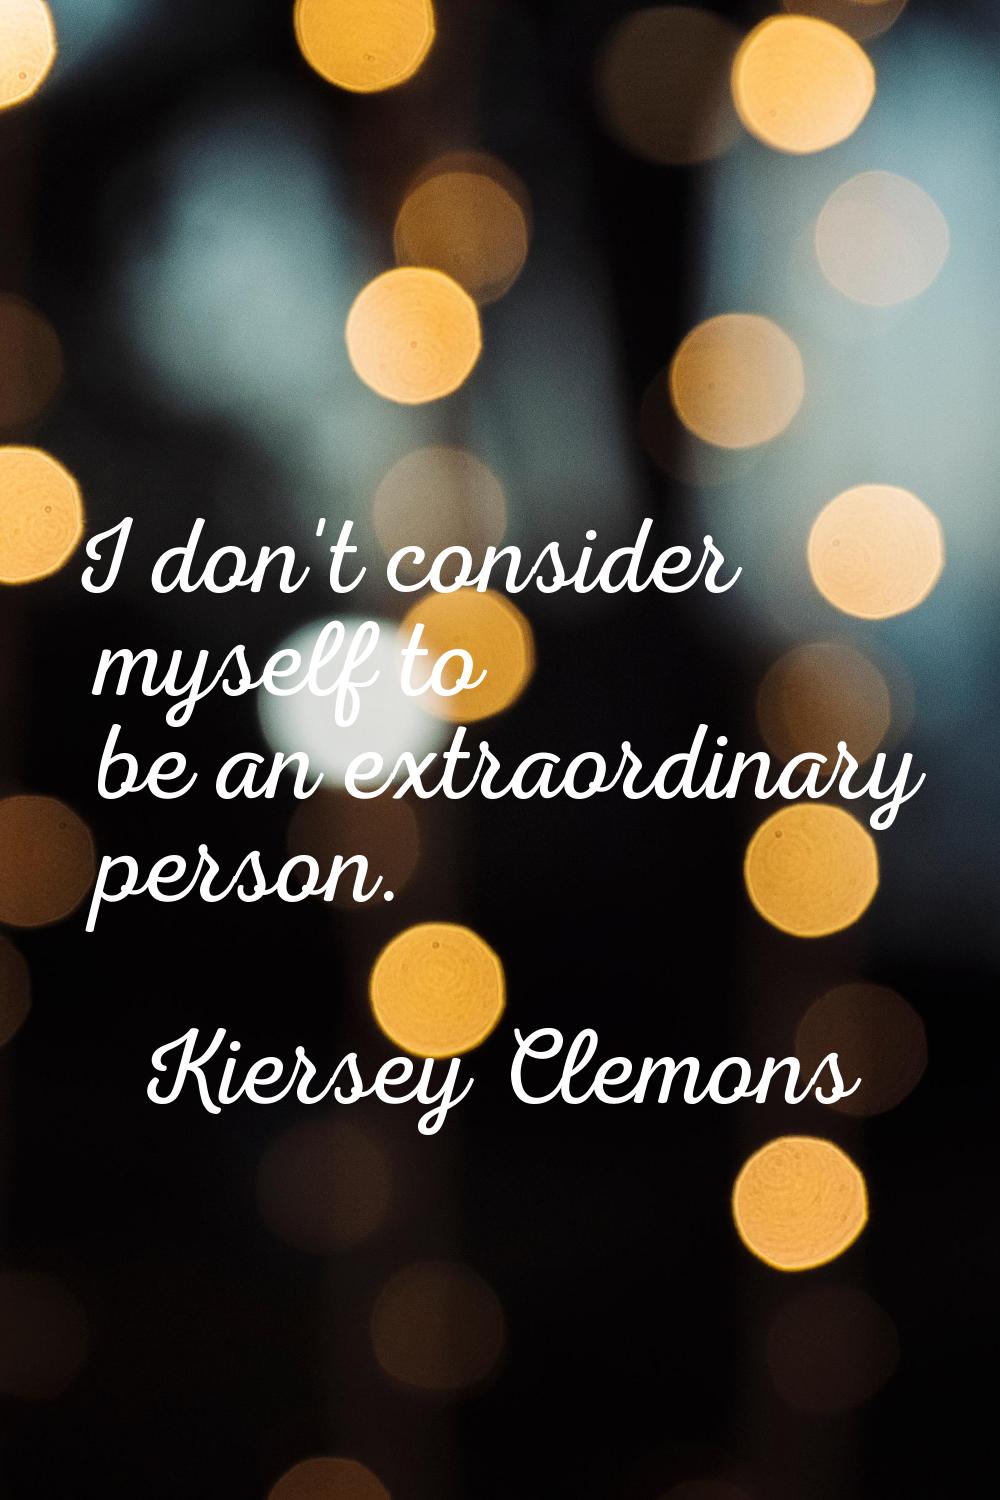 I don't consider myself to be an extraordinary person.